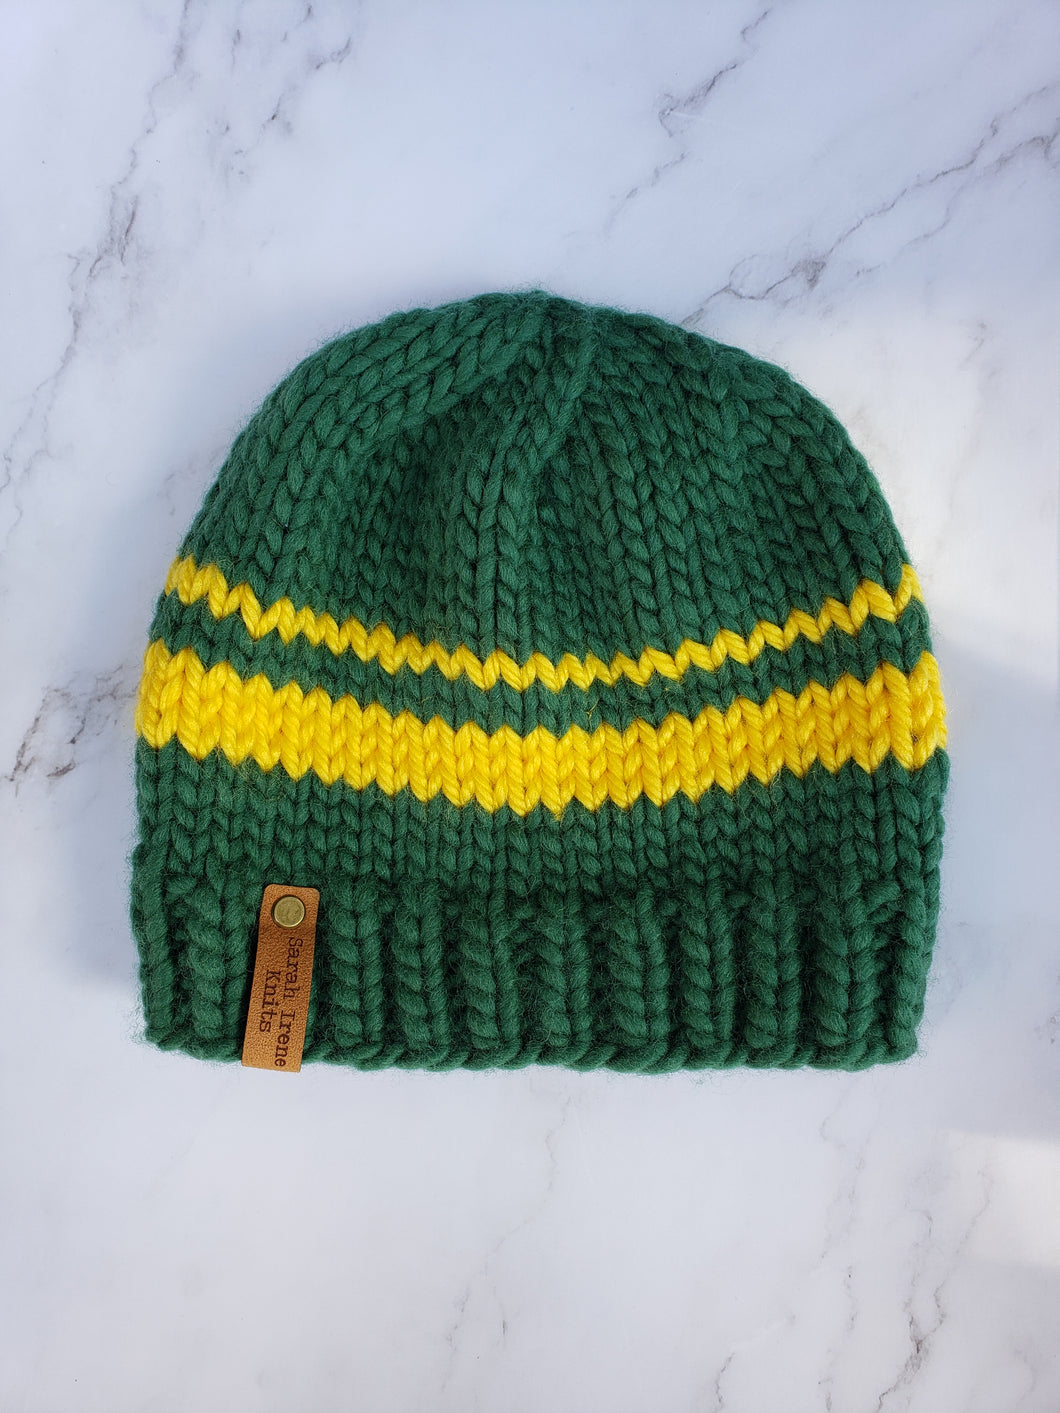 Classic Beanie - Sports Fan Green and Yellow - Various Sizes